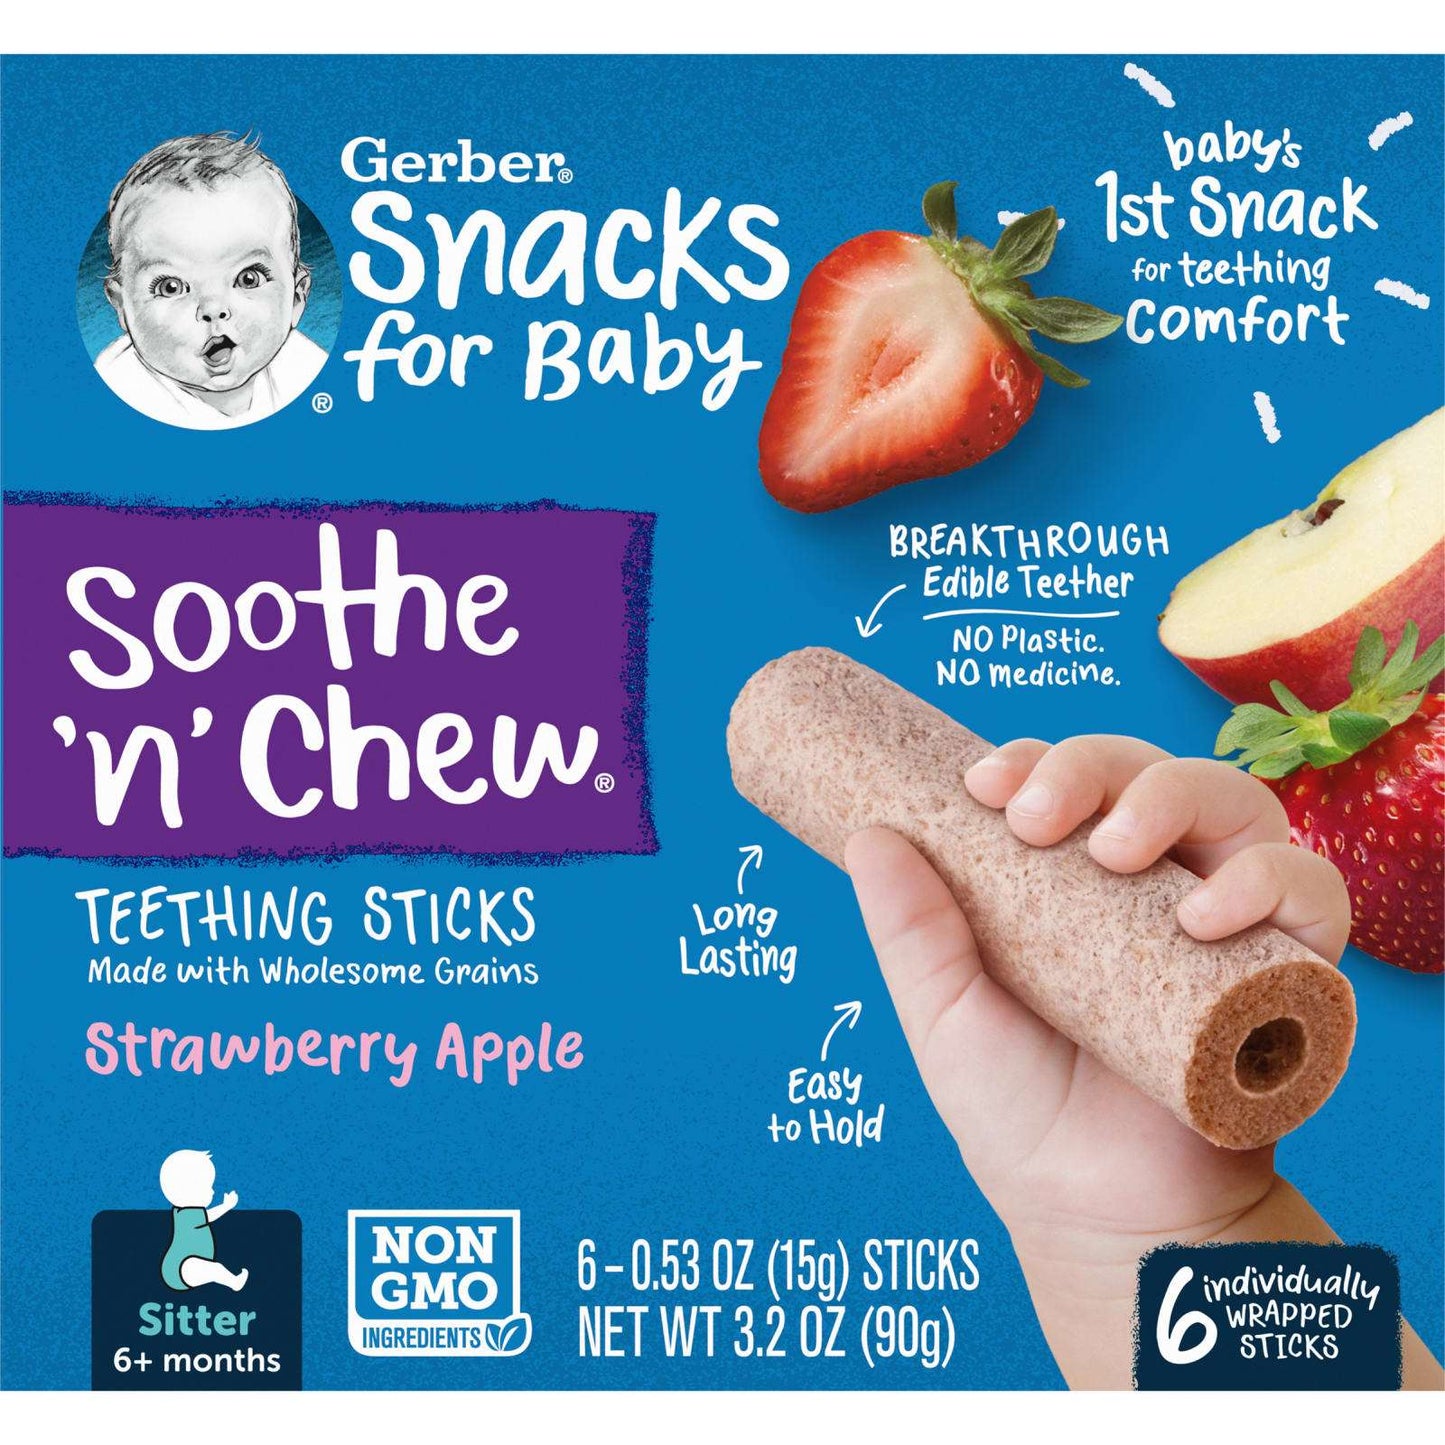 Gerber, Snacks for Baby, Soothe 'n' Chew, Teeth Sticks, 6 Months+, Strawberry Apple, 6 Individually Wrapped Sticks, 0.53 oz (15 g) Each